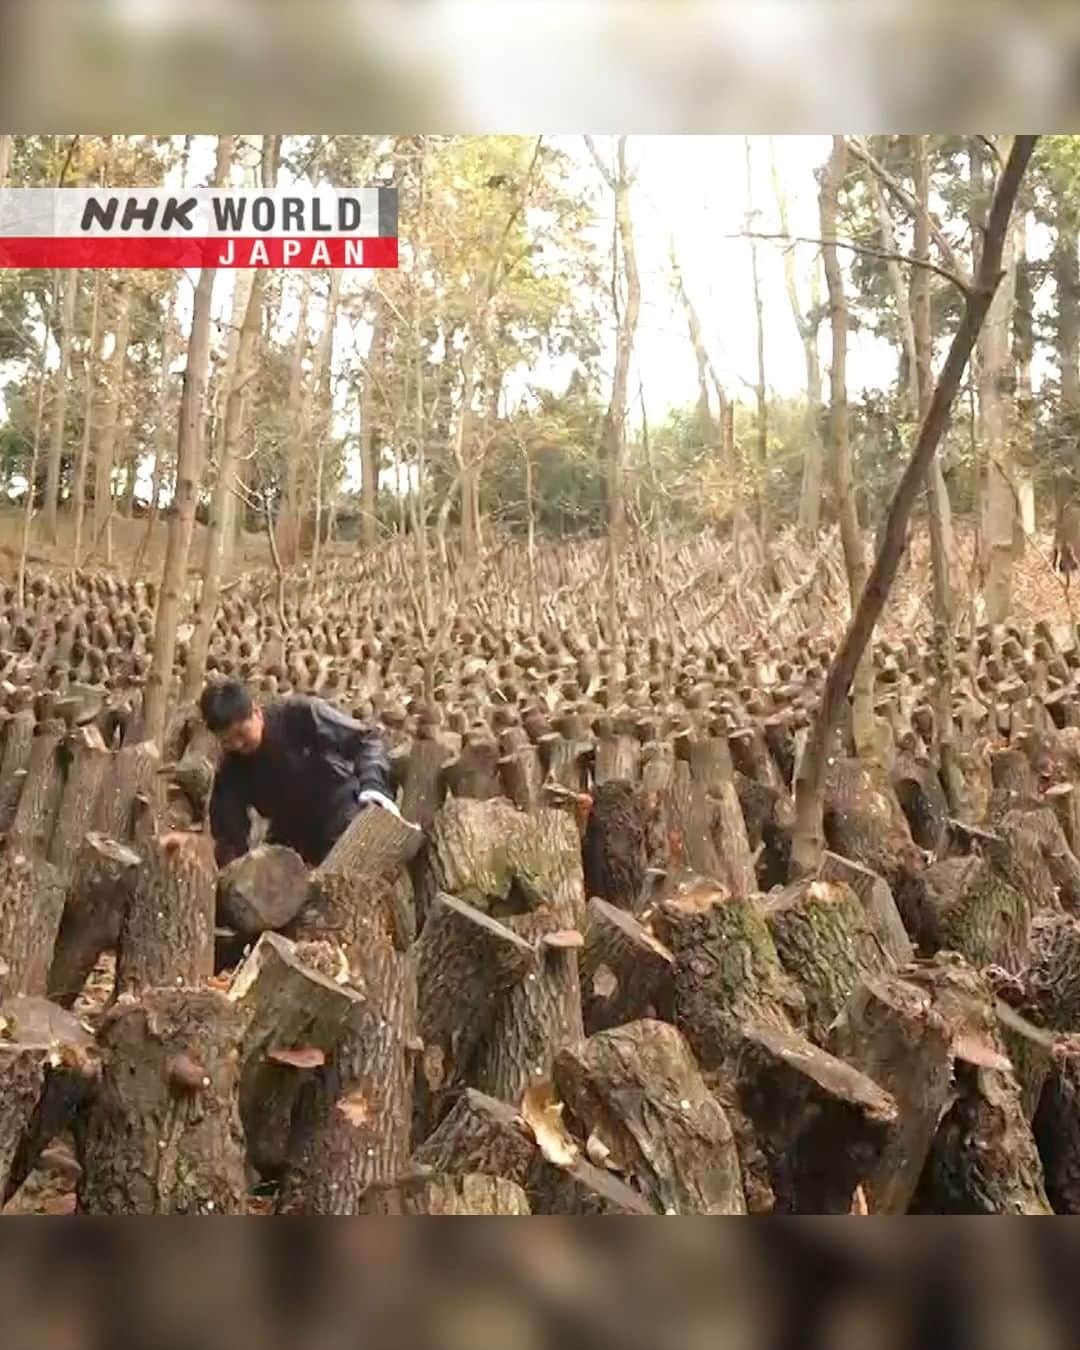 NHK「WORLD-JAPAN」のインスタグラム：「Have you cooked with shiitake?  Log-grown shiitake have a strong umami.🍄🪵  This 100-year-old farm has around 35,000 logs growing this flavor packed mushroom.  So they keep longer, most will be dried. If done soon after harvest, the shiitake will retain their flavor as drying produces an umami compound called guanylic acid. When rehydrated, the shiitake contain ten times the umami as when fresh.😋 Yum.  What have you cooked with shiitake? . 👉See more｜Watch｜Trails to Oishii Tokyo: SHIITAKE｜Free On Demand｜NHK WORLD-JAPAN website.👀 . 👉Tap in Stories/Highlights to get there.👆 . 👉See the link in our bio for more on the latest from Japan. . 👉If we’re on your Favorites list you won’t miss a post. . . #umami #うま味 #dashi #だし #出汁 #shiitake #shiitakemushrooms #japanesemushroom #mushroom #loggrownshiitake #mushroomfarm #しいたけ #driedshiitake #japanesefood #japanesingredients #visitjapan #discoverjapan #japanfoodie #tokyo #trailstooishiitokyo #hiddenjapan #discoverjapan #nhkworldjapan」